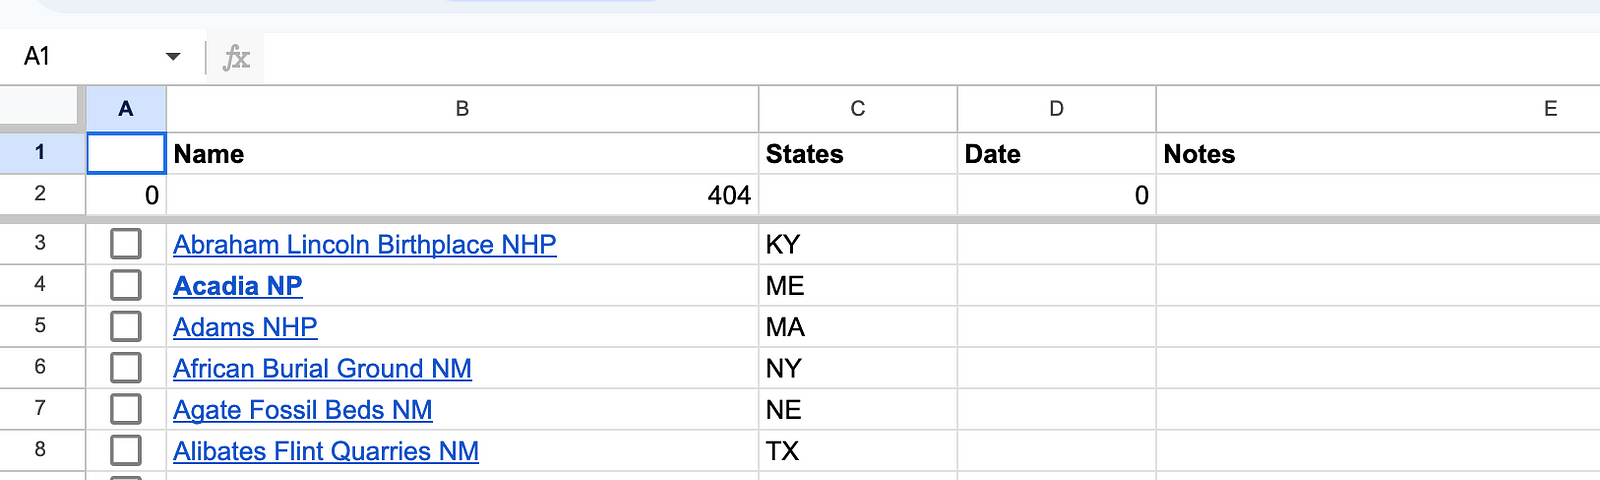 Screenshot of the National Park Checklist spreadsheet showing a list of National Parks.